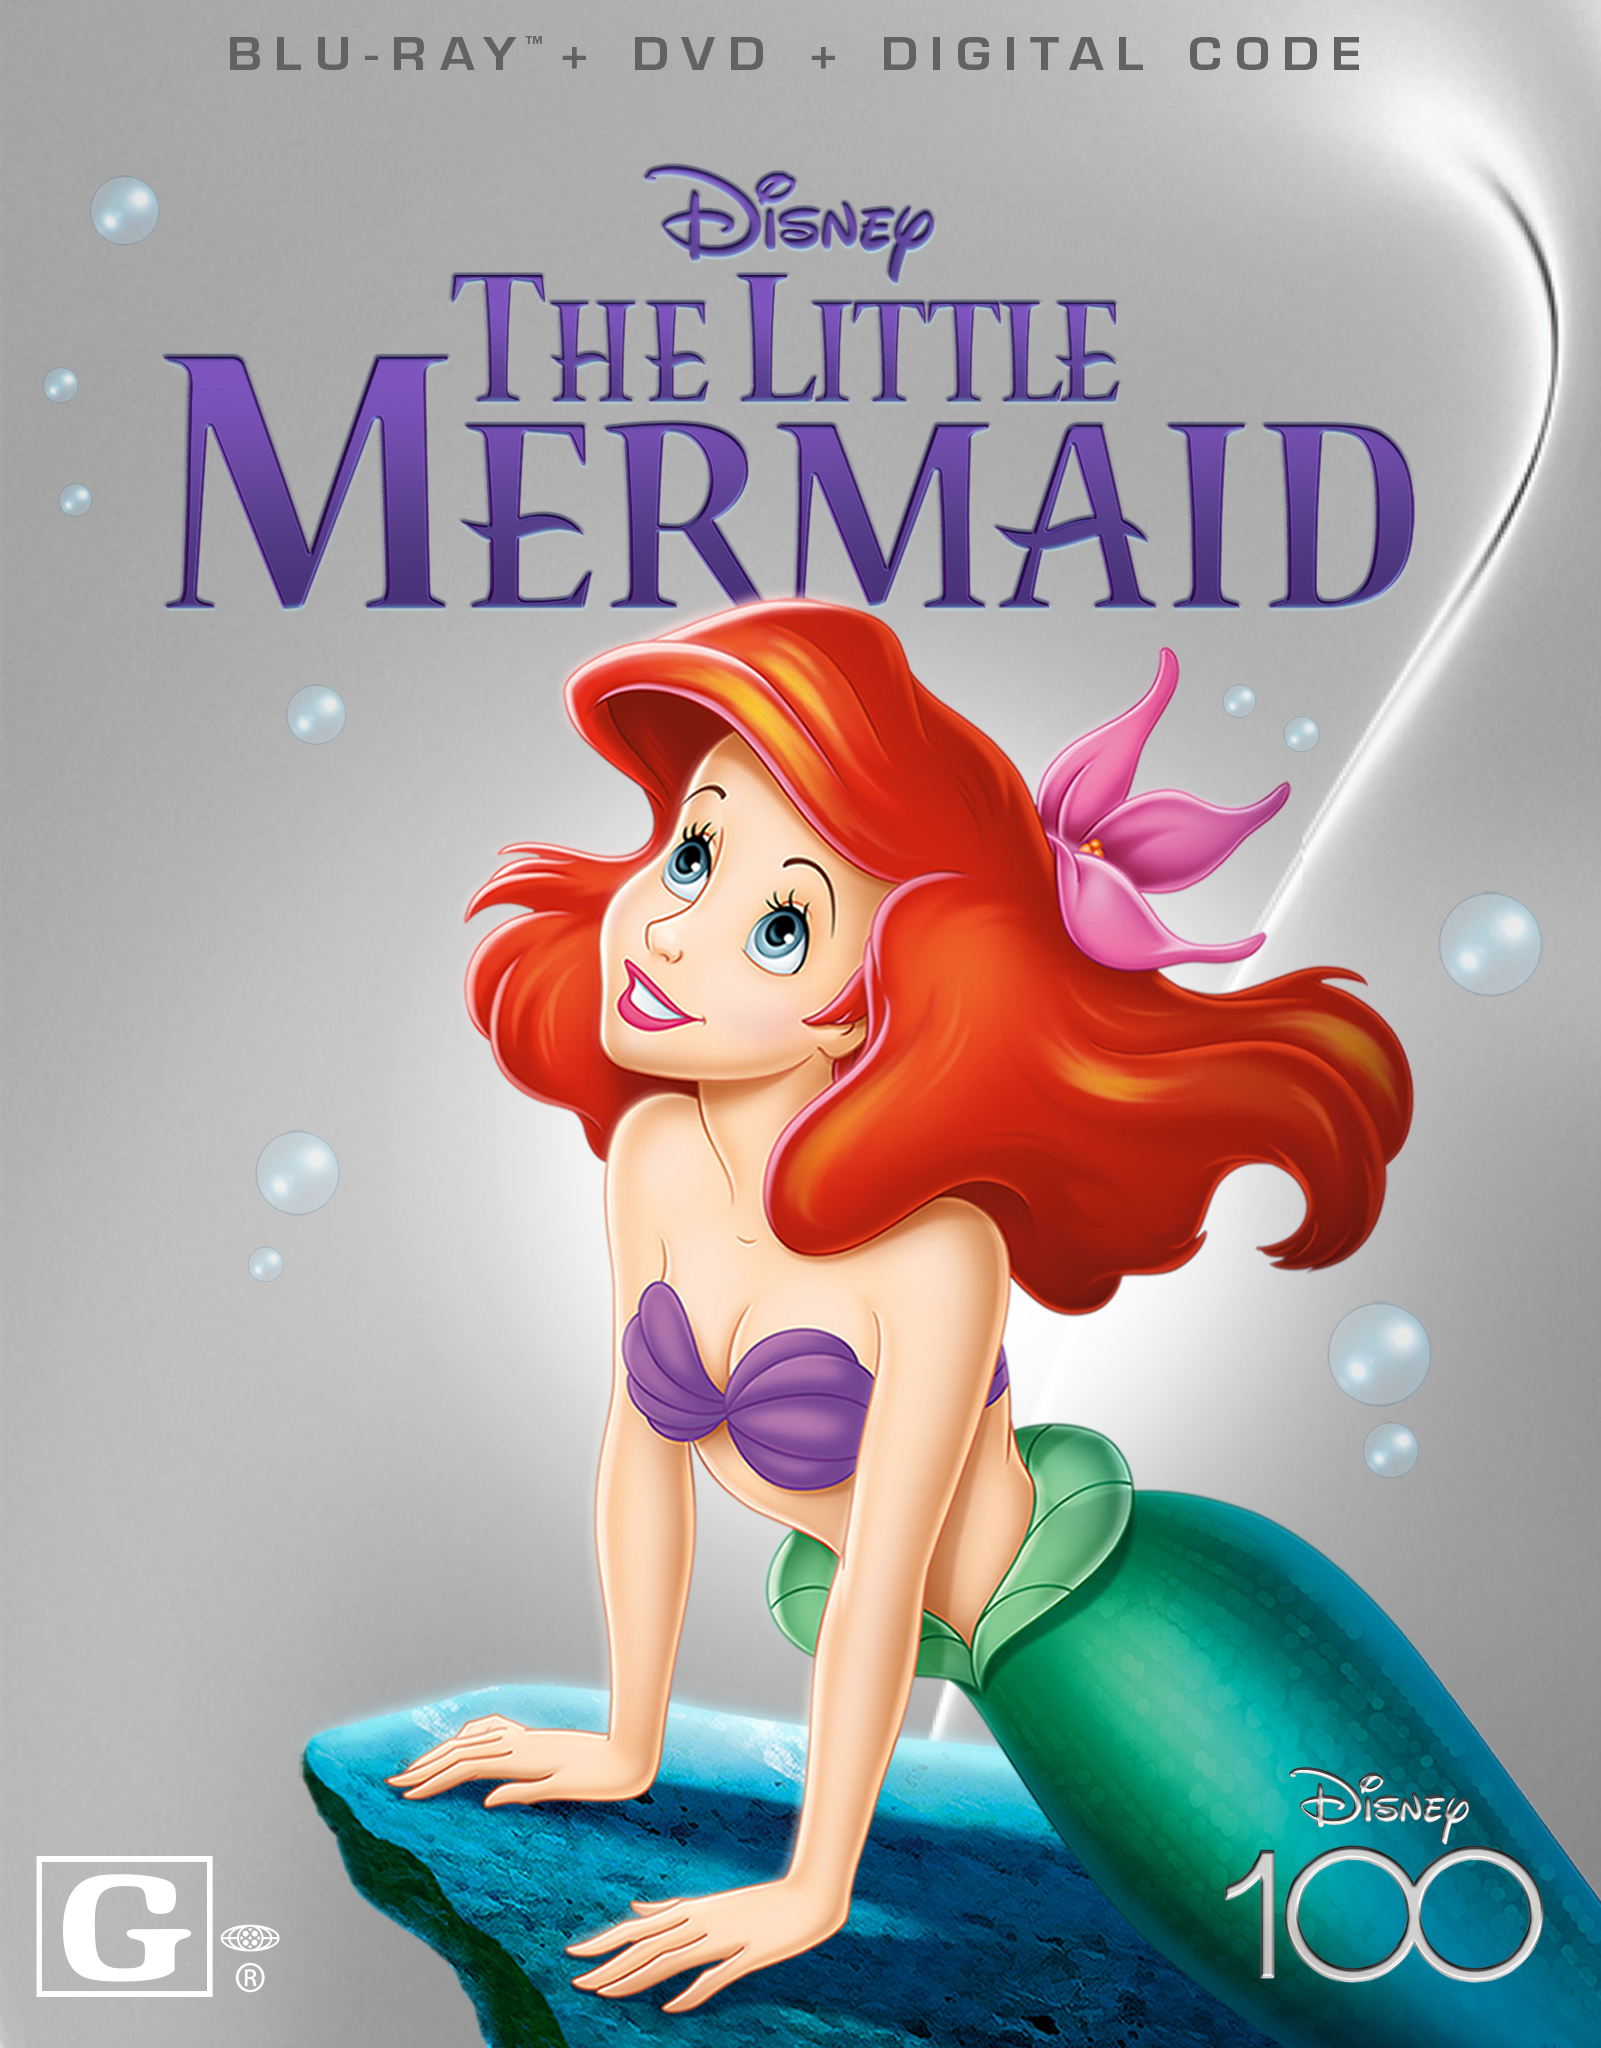 the little mermaid movie poster 1989